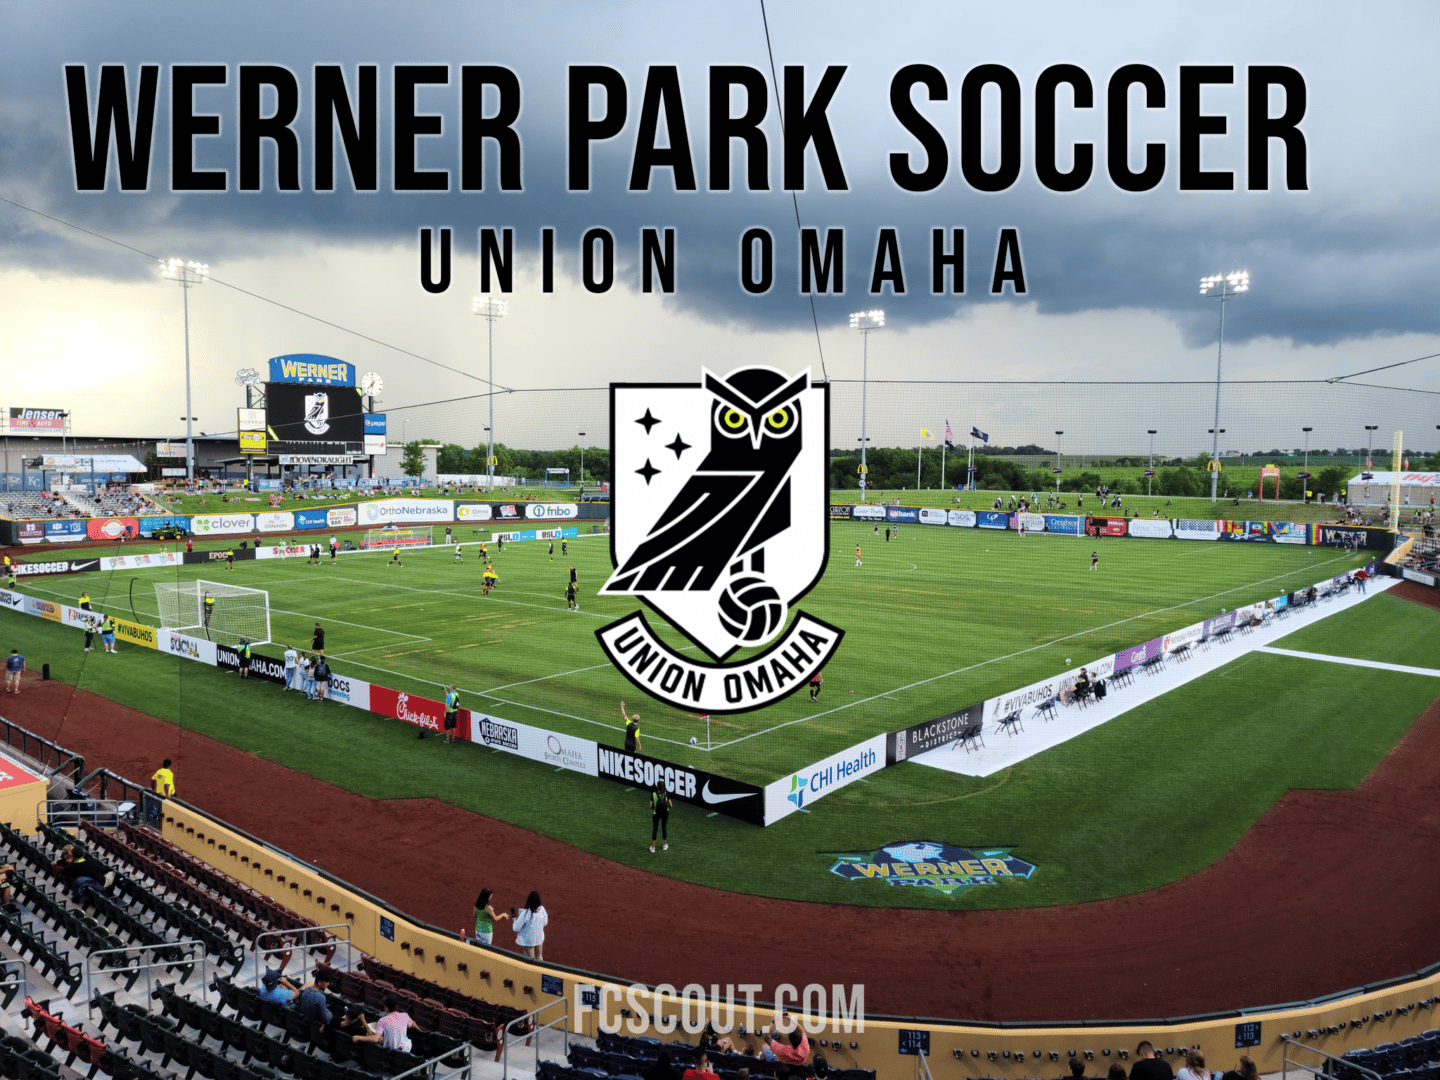 Union Omaha Tryouts & Club Guide History, Stadium, Players, and More!